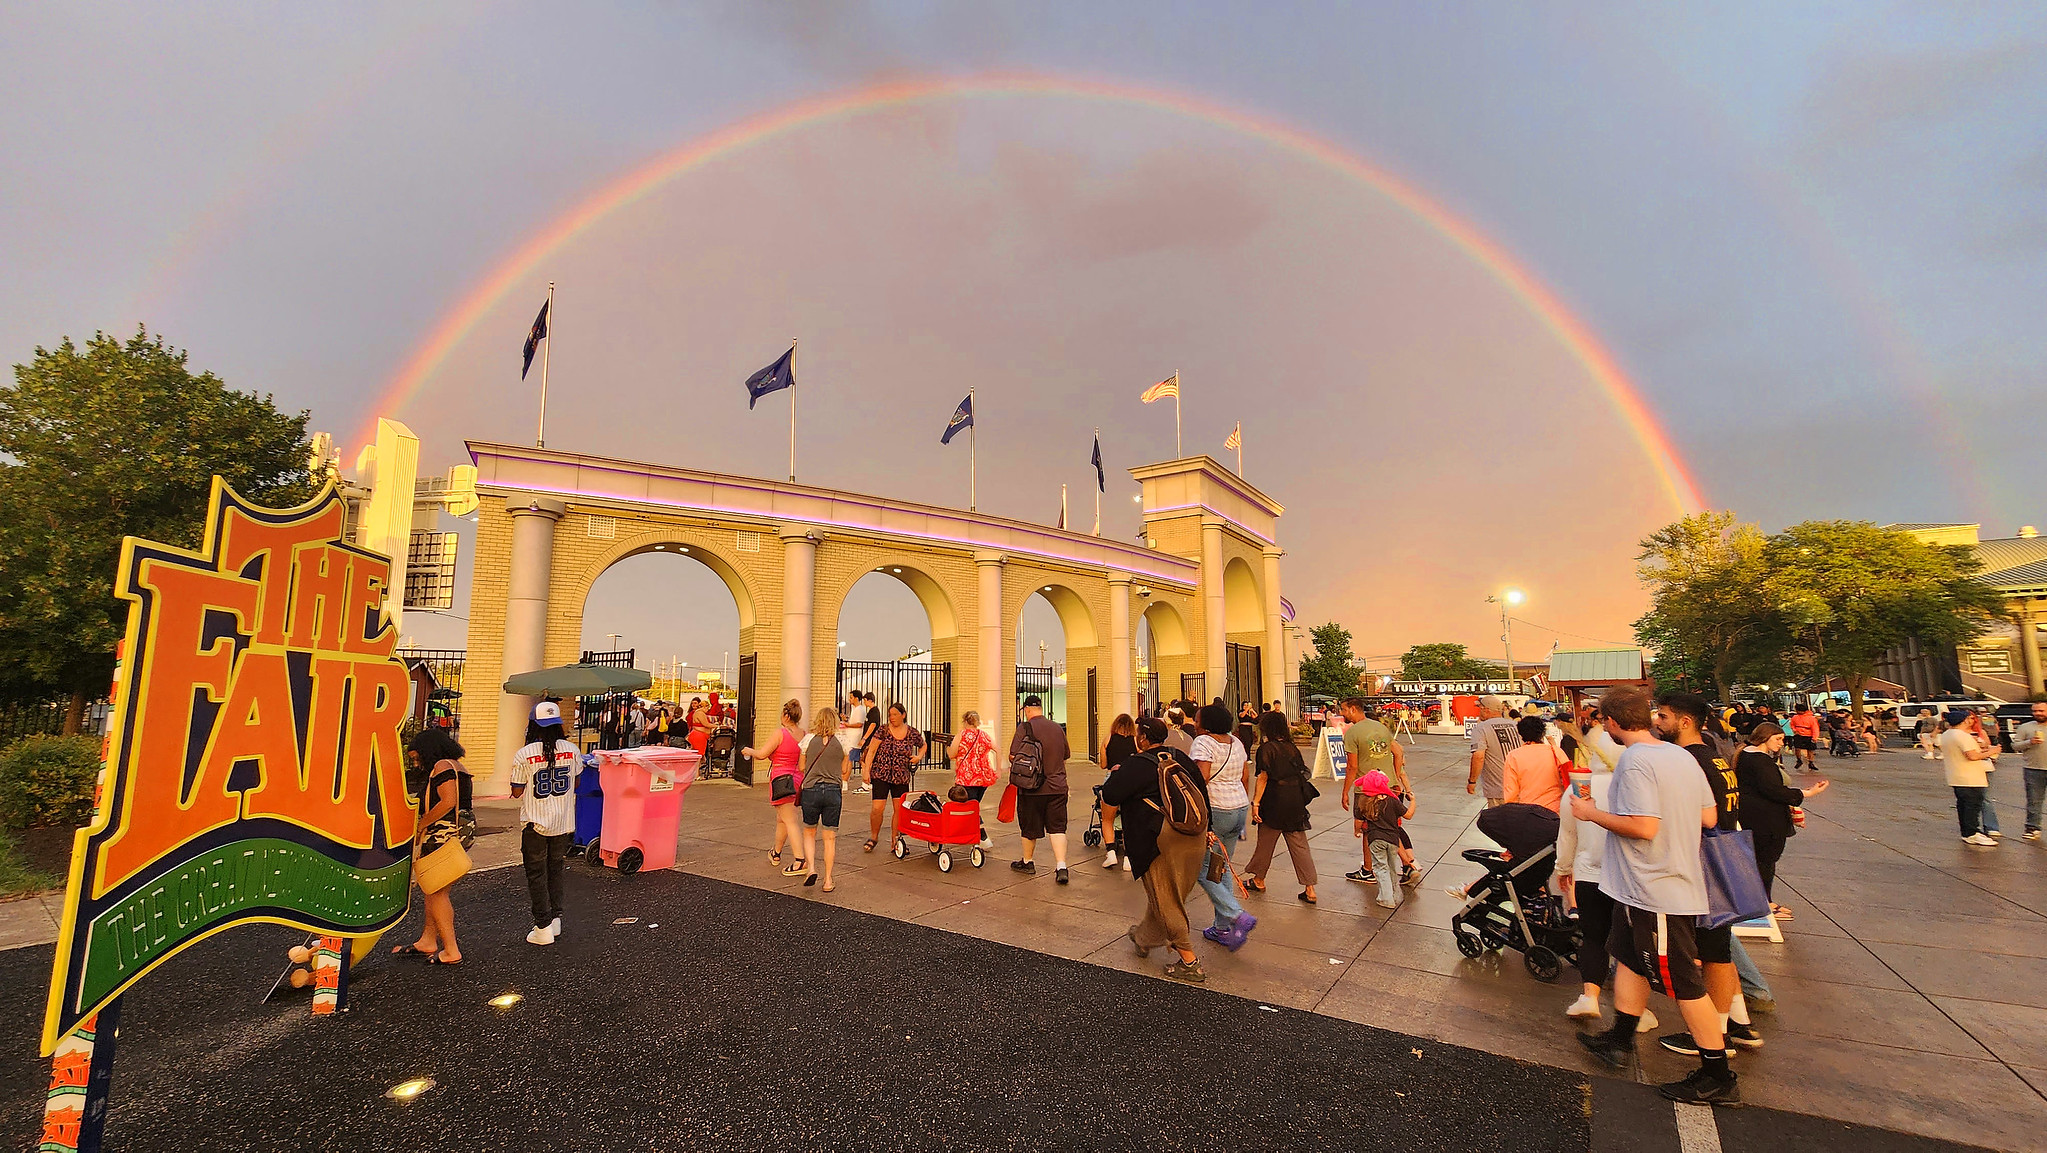 Rainbow over the new york state fair entrance and people walking around